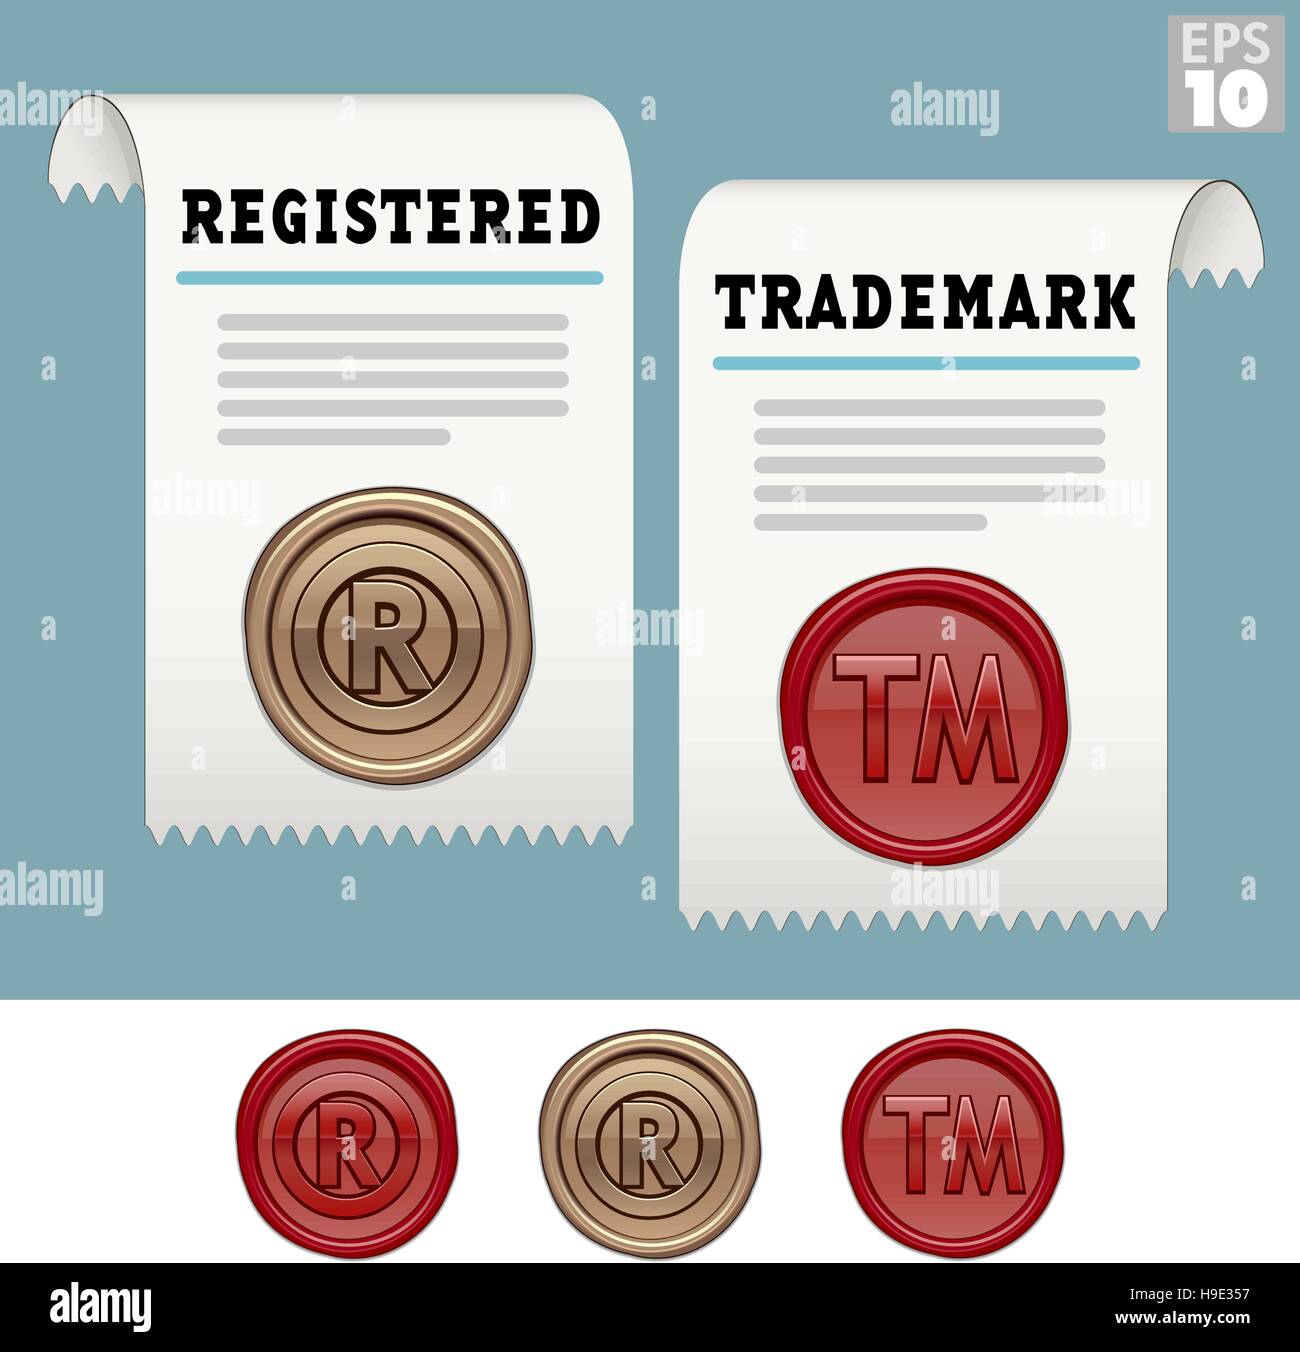 Registered trademark wax seal on a scroll document, golden and red wax seal Stock Vector